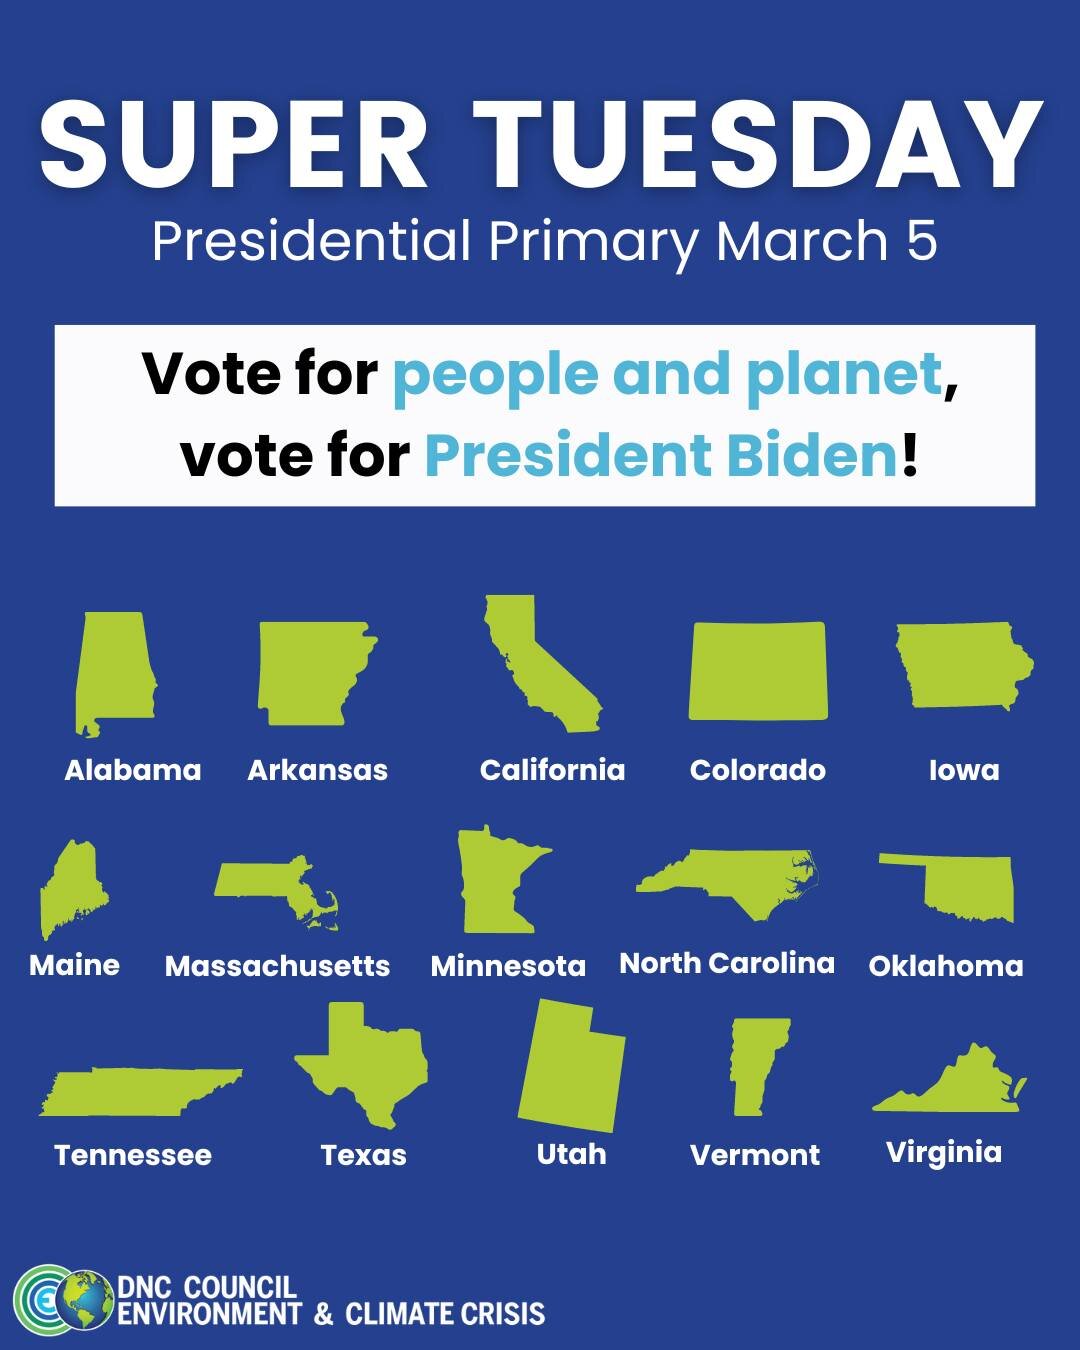 🗳️15 Presidential Primaries for Dems on Super Tuesday!

Vote early if you can &mdash; get voting info here: IWillVote.com
.
.
.
.
#SuperTuesday #Environment #ClimateDems #VoteBlue #VoteEarly #BidenHarris #ClimateVoters
@AlabamaDemocrats @ArkDems @CA